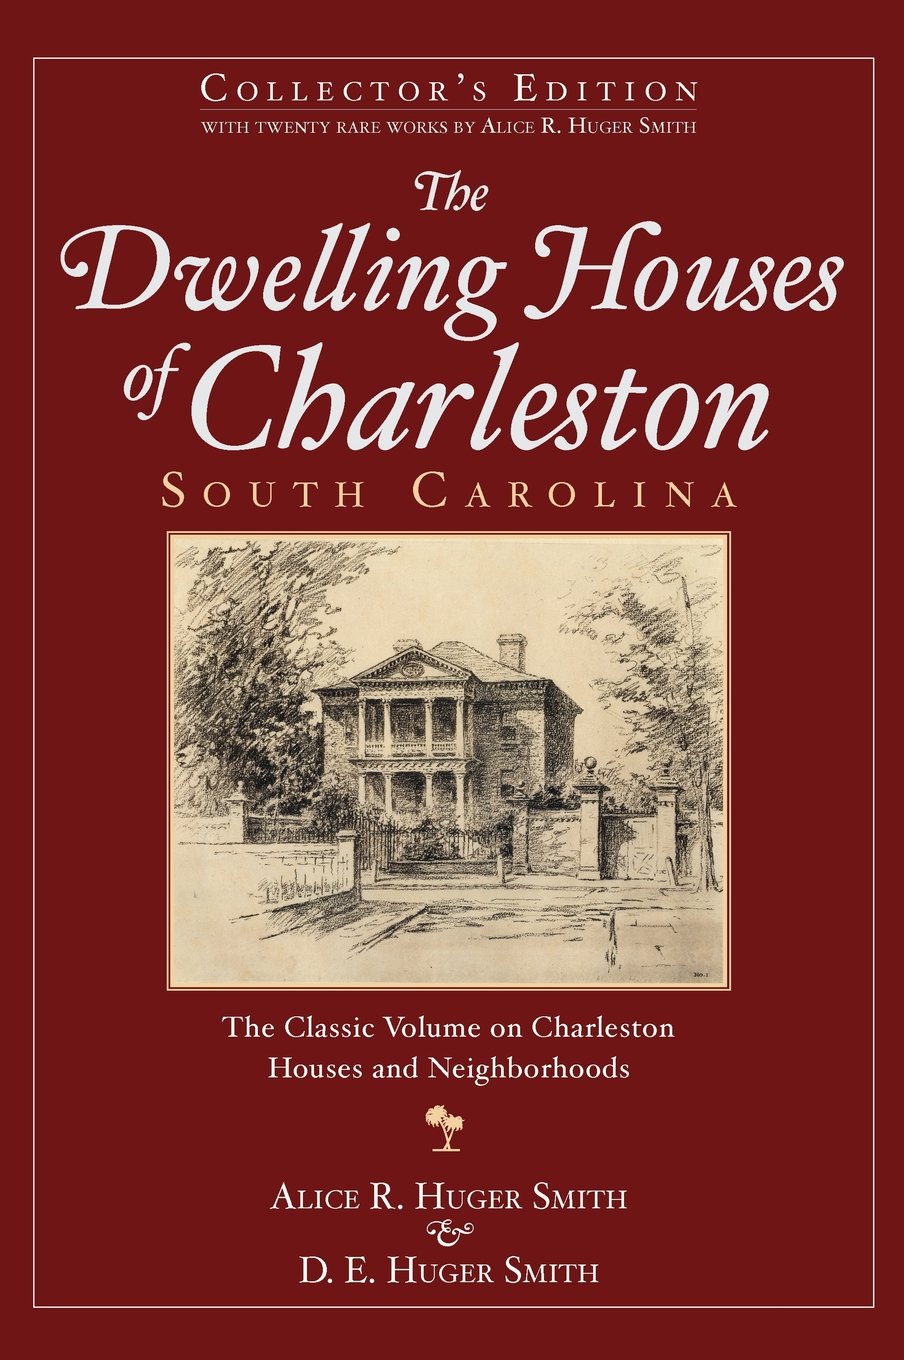 The Dwelling Houses of Charleston, South Carolina (Collector's Edition) ~ Alice R. Huger Smith & D.E. Huger Smith